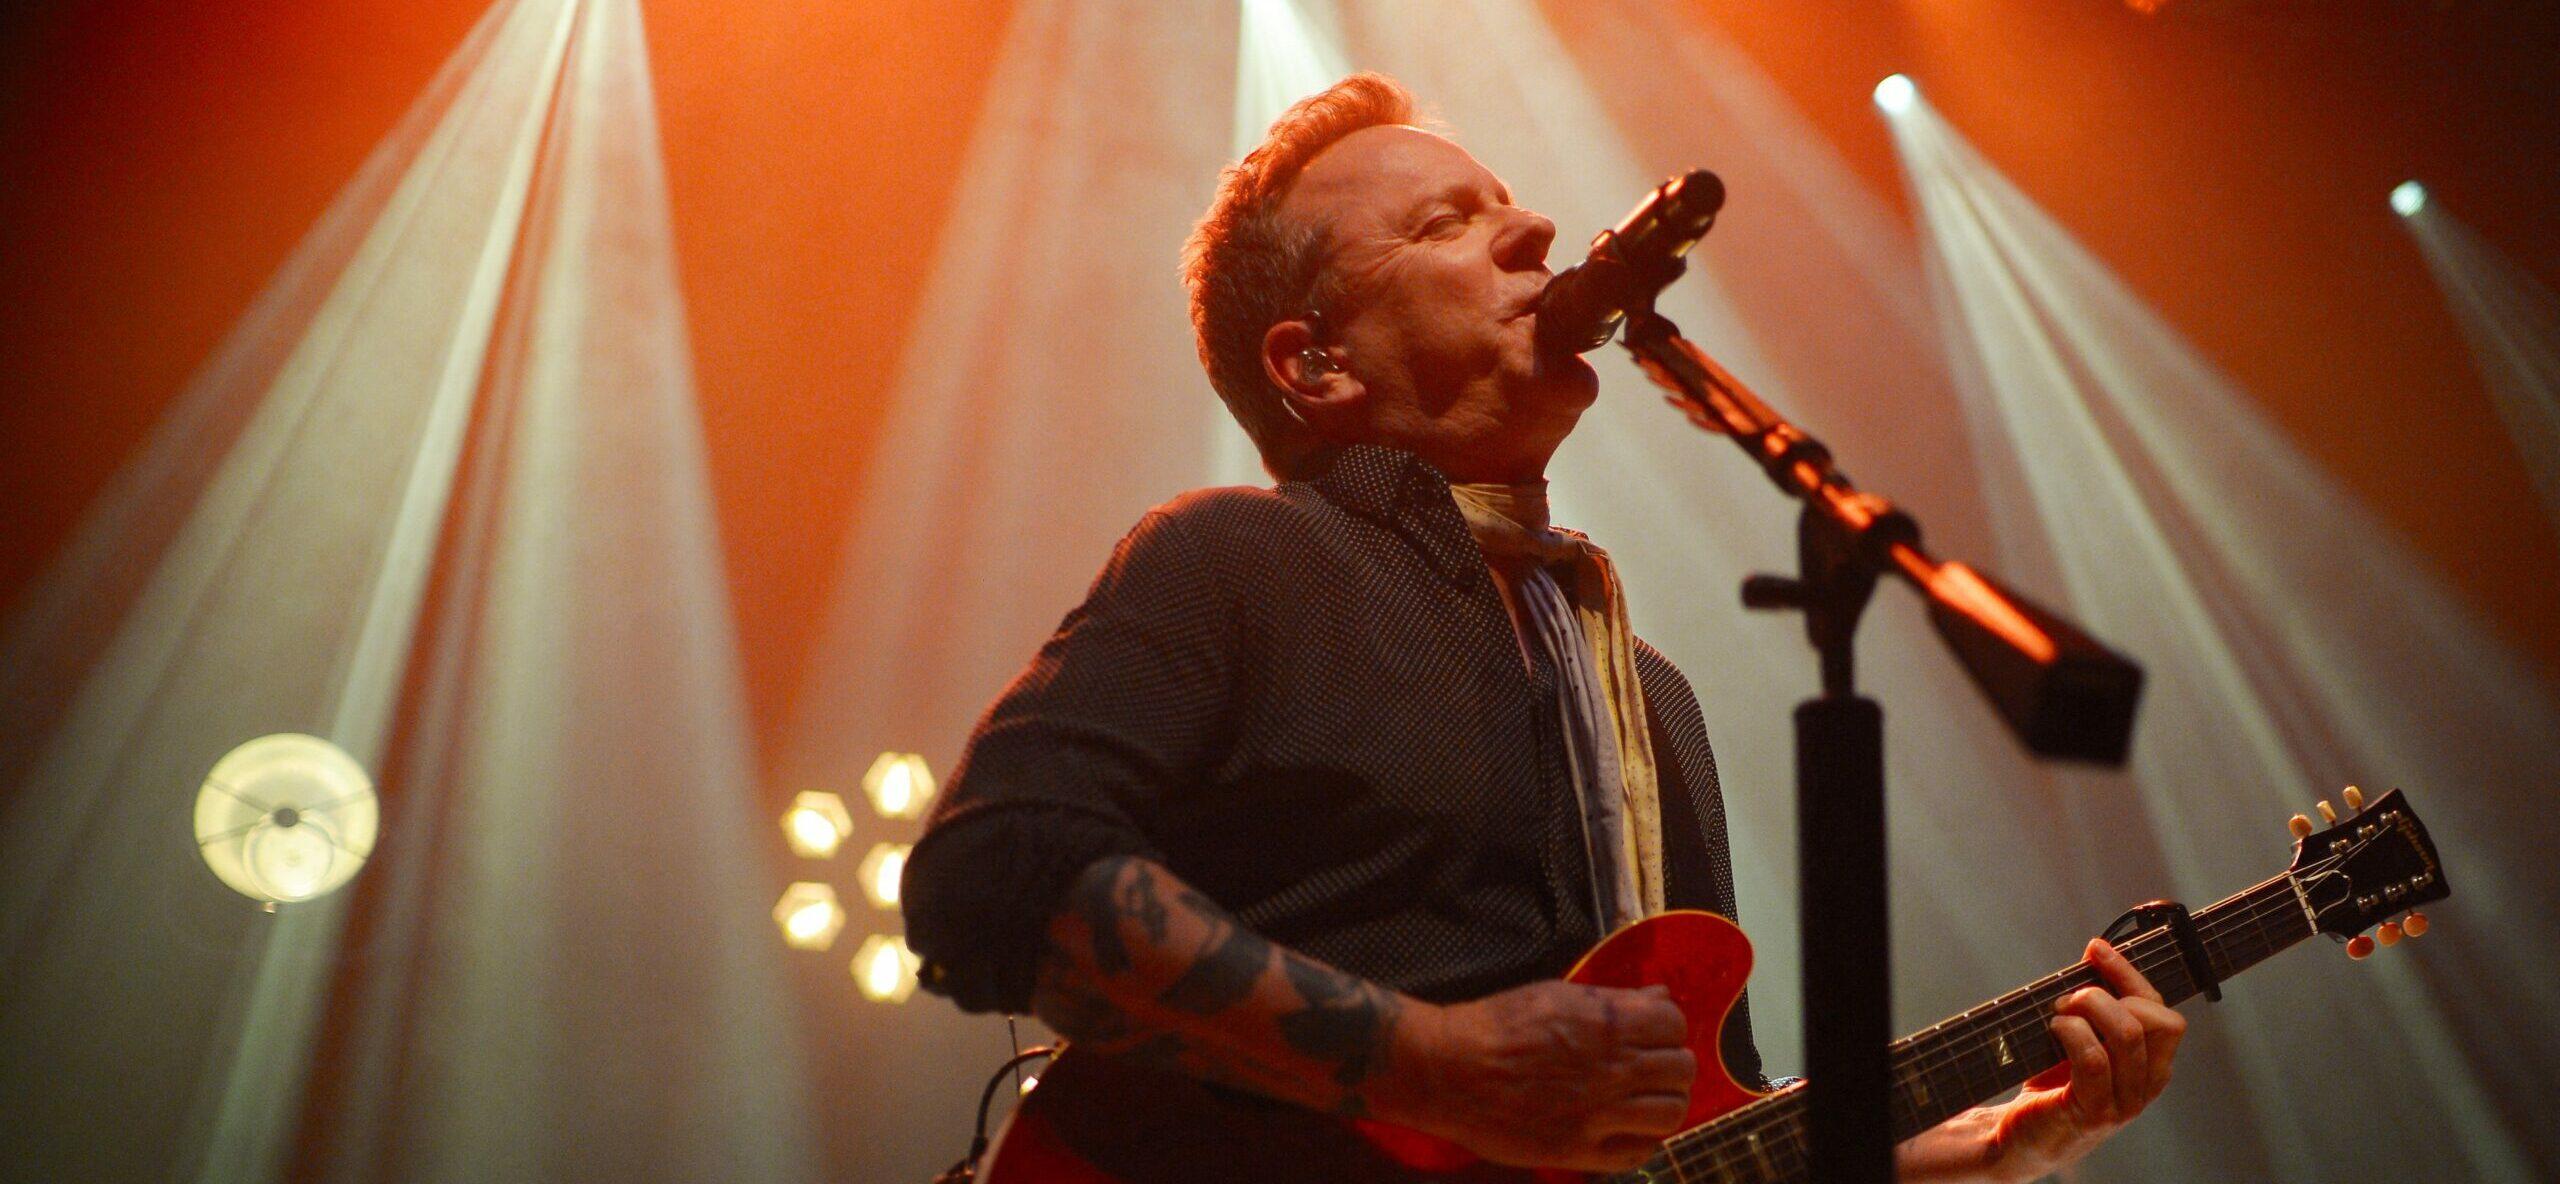 Kiefer Sutherland Performing At Shepherds Bush Empire, London On October 30, 2022 In England.